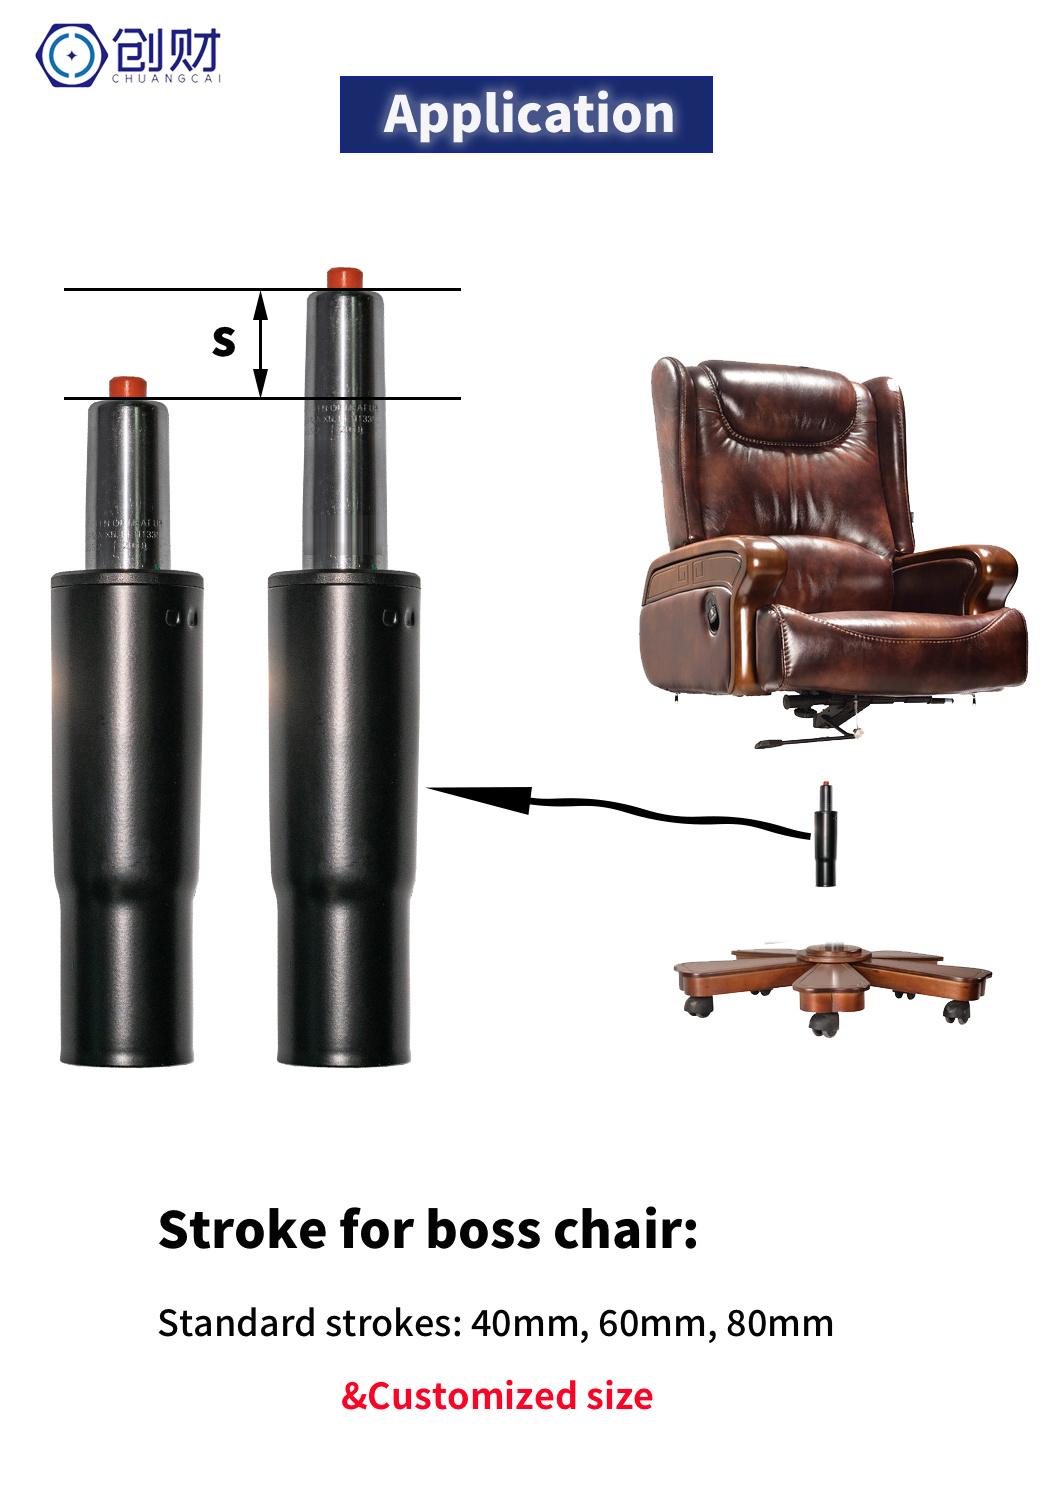 Rotational Gas Spring Manufacturer High Quality Gas Lifts for Office Chair